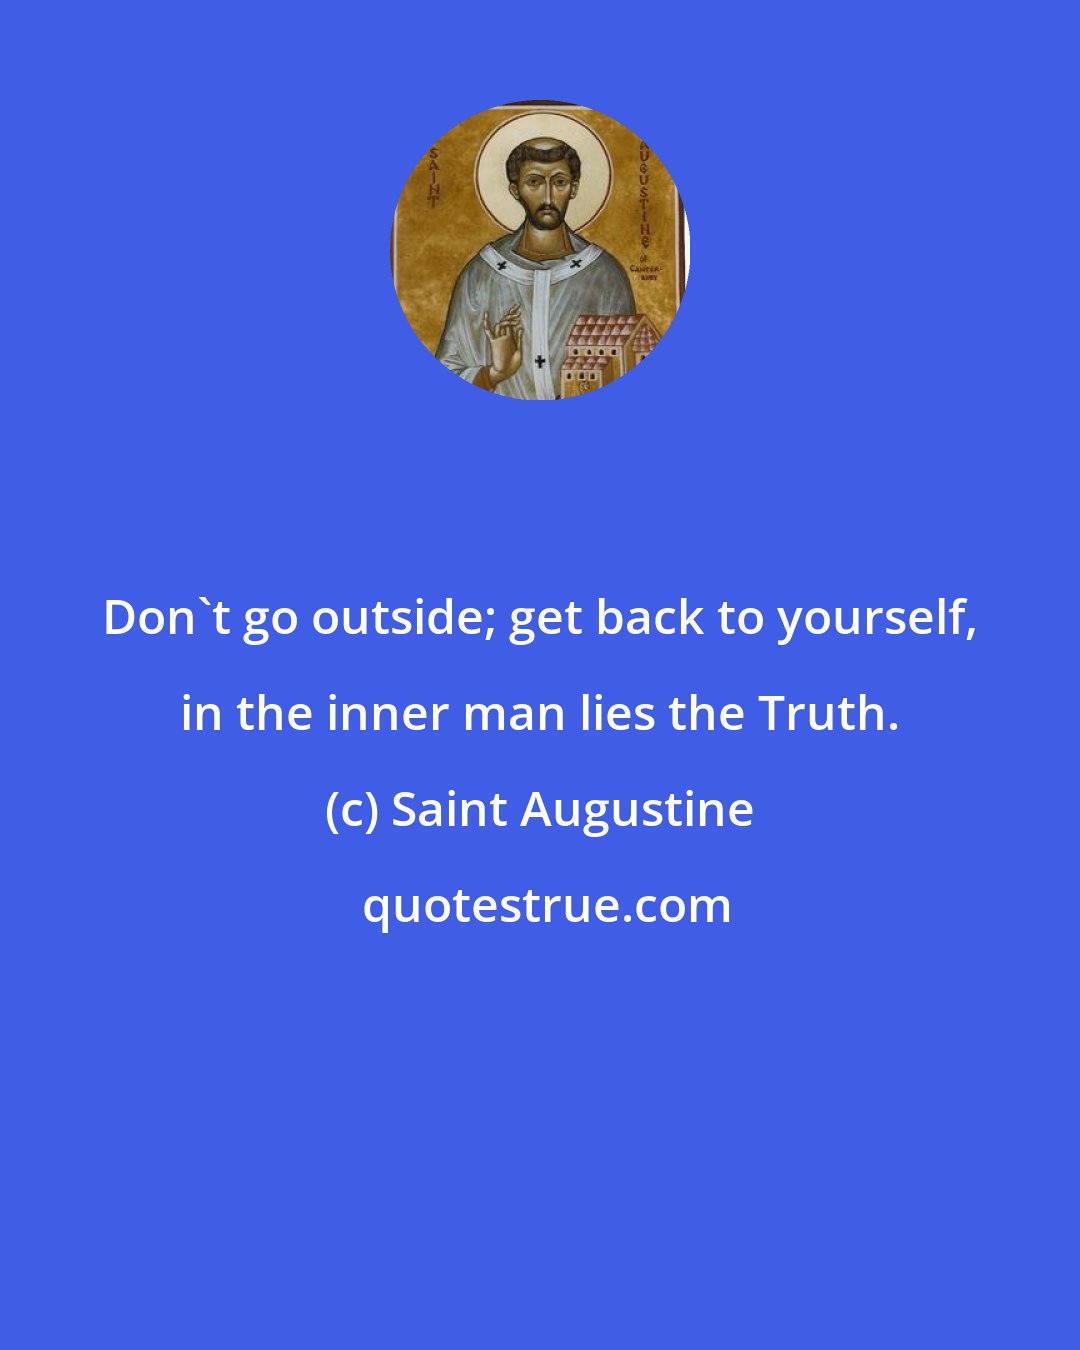 Saint Augustine: Don't go outside; get back to yourself, in the inner man lies the Truth.